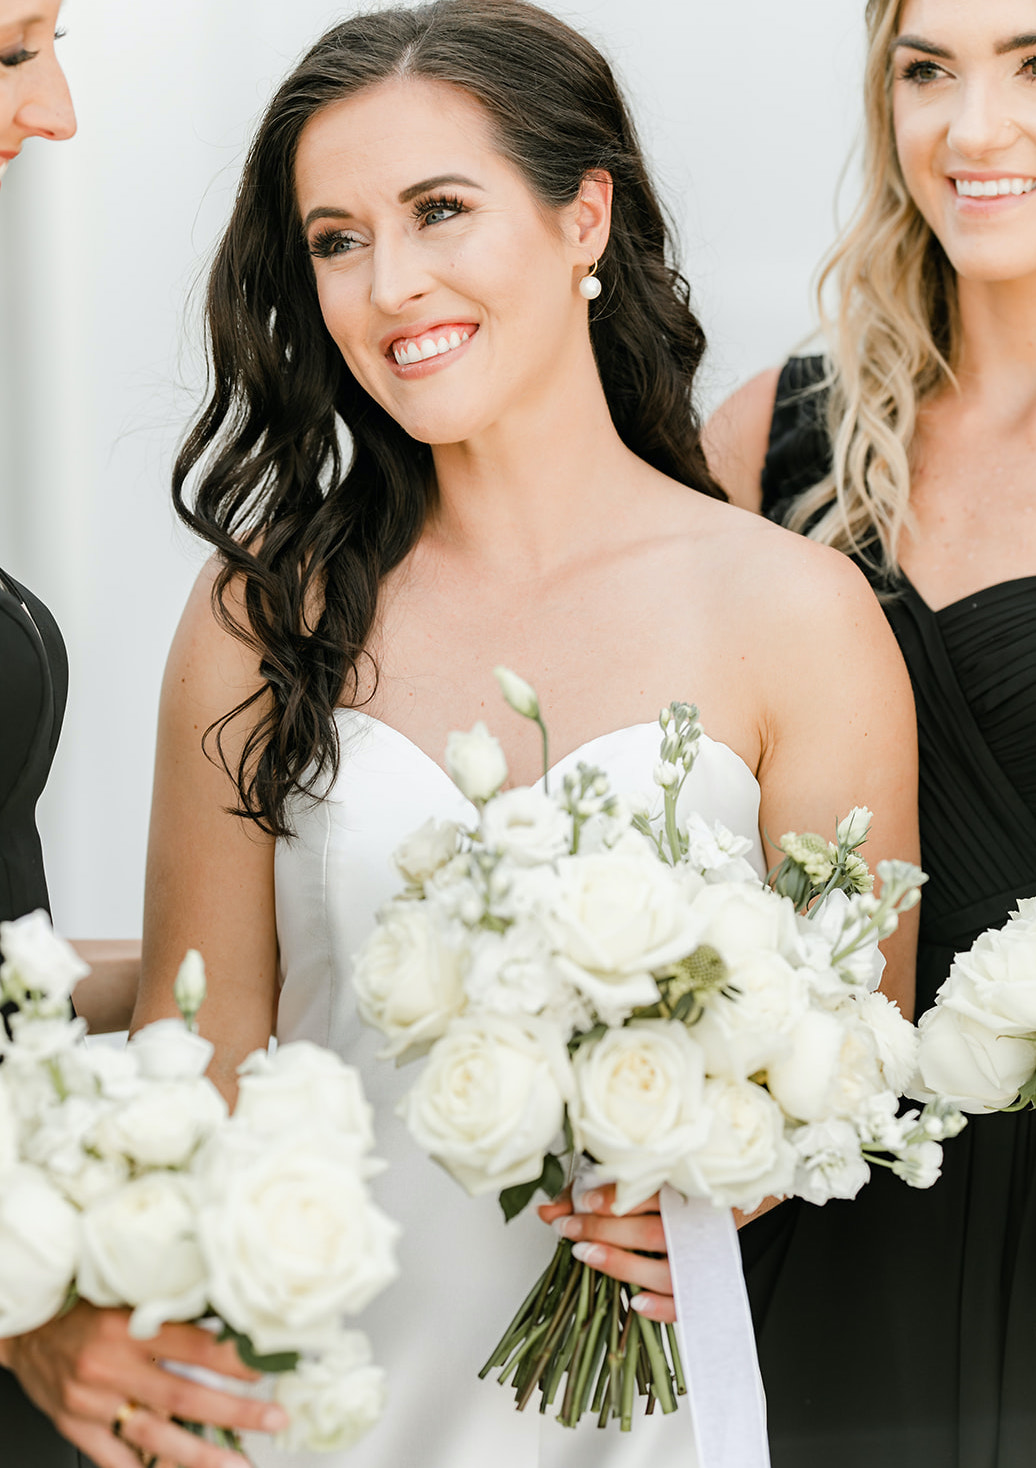 A bride smiles with her bridesmaids and holds her flower bouquet full of white roses.